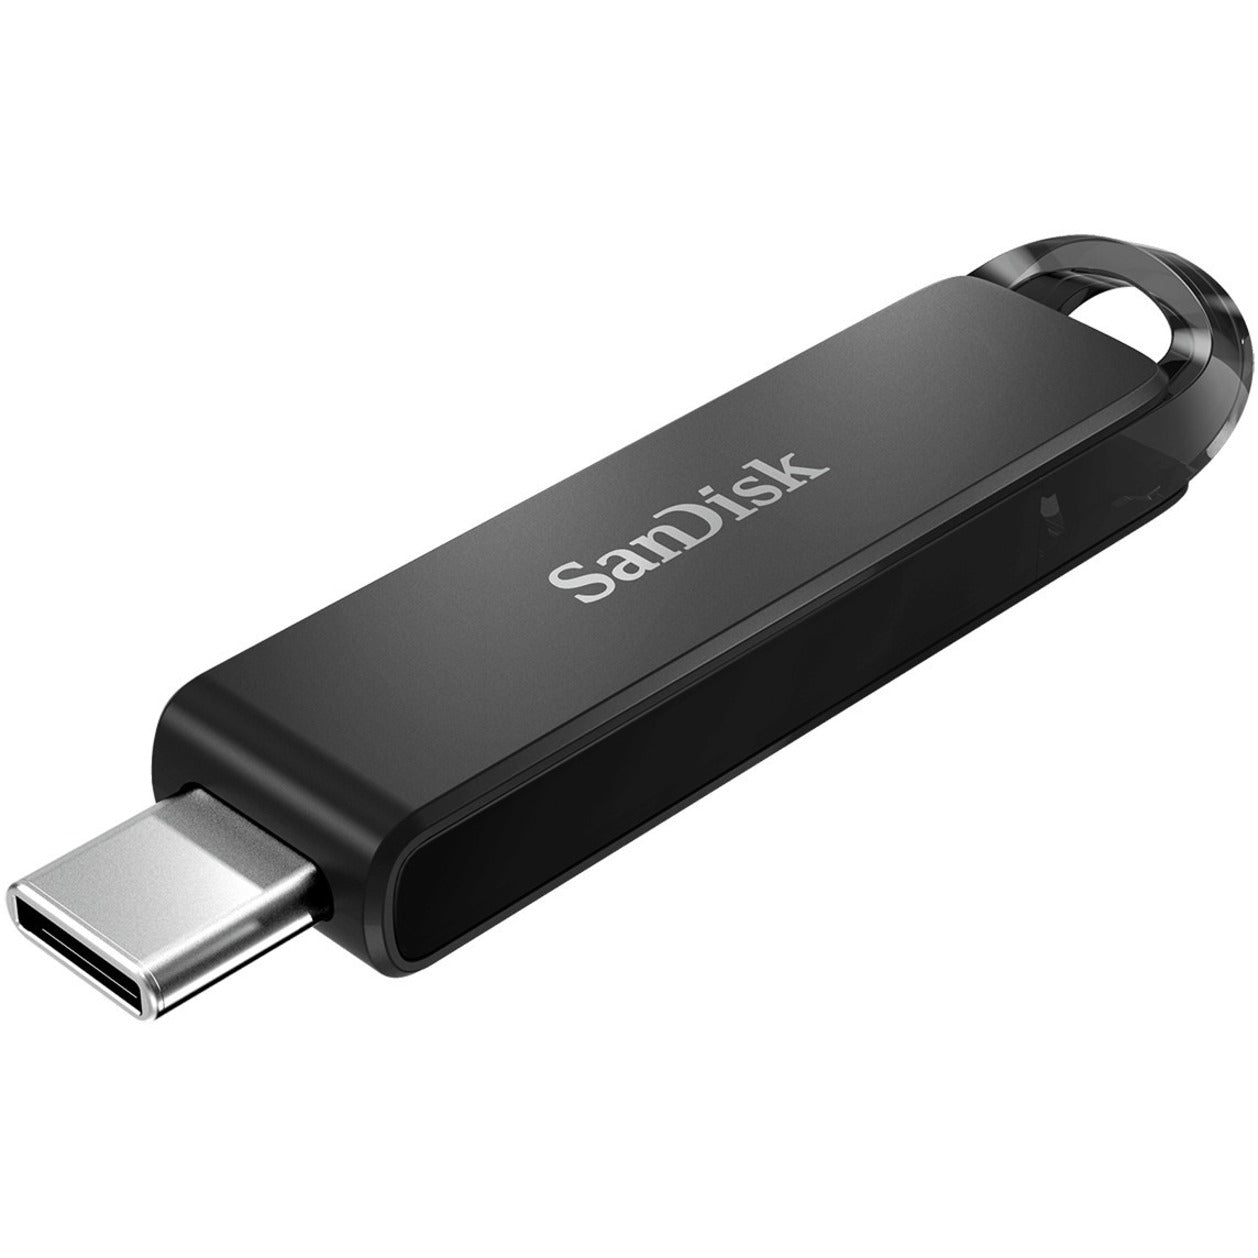 SanDisk SDCZ460-032G-A46 Ultra USB Type-C Flash Drive 32GB, High-Speed Data Transfer